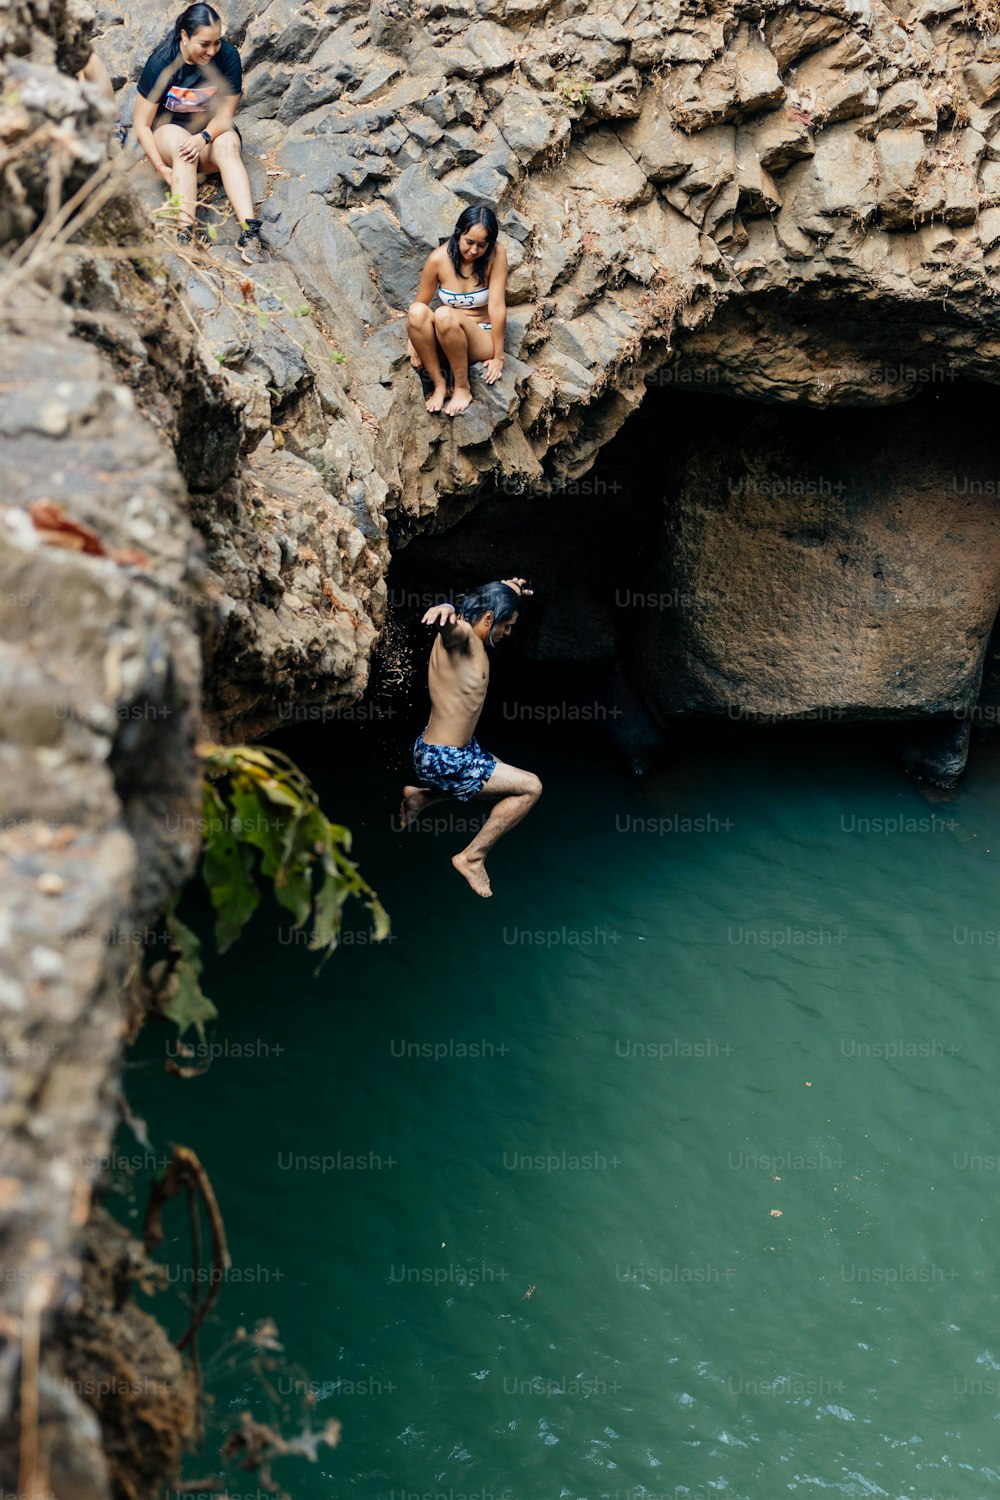 a group of people jumping off a cliff into a body of water